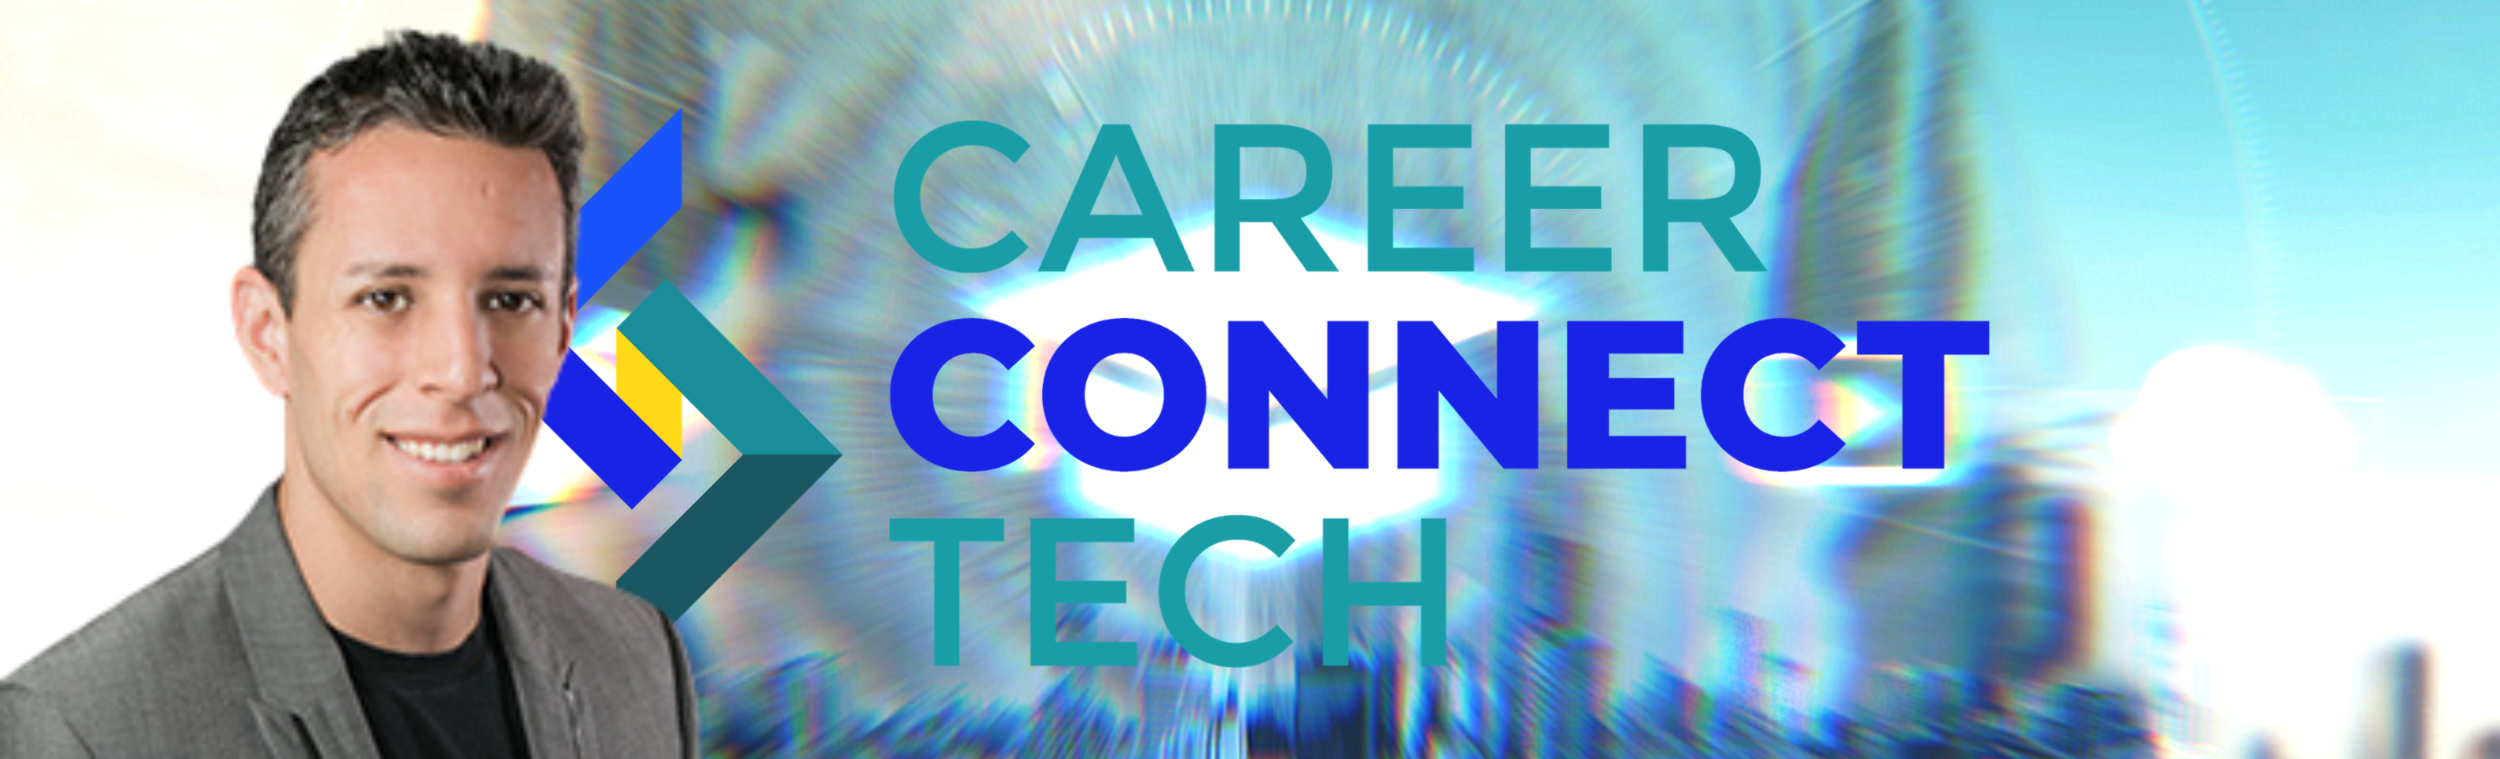 Career Connect Tech 